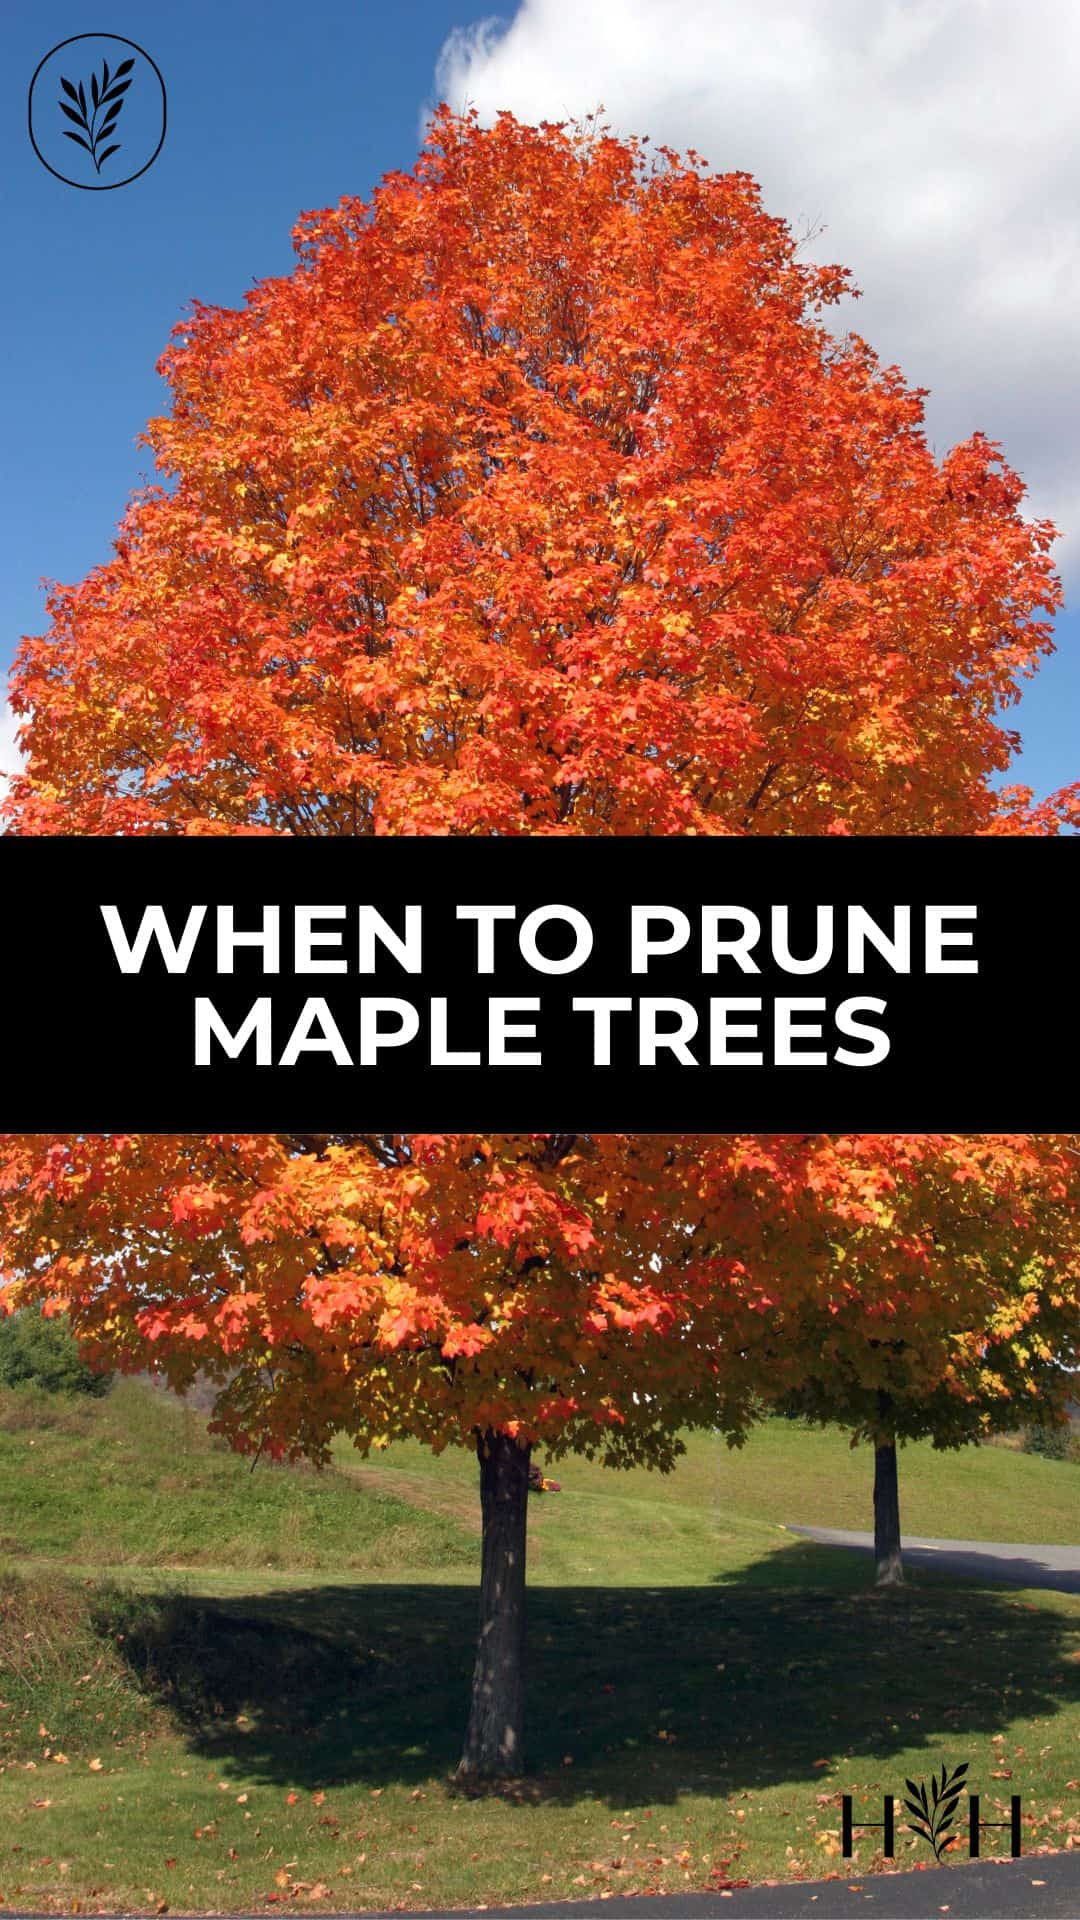 When to prune maple trees via @home4theharvest